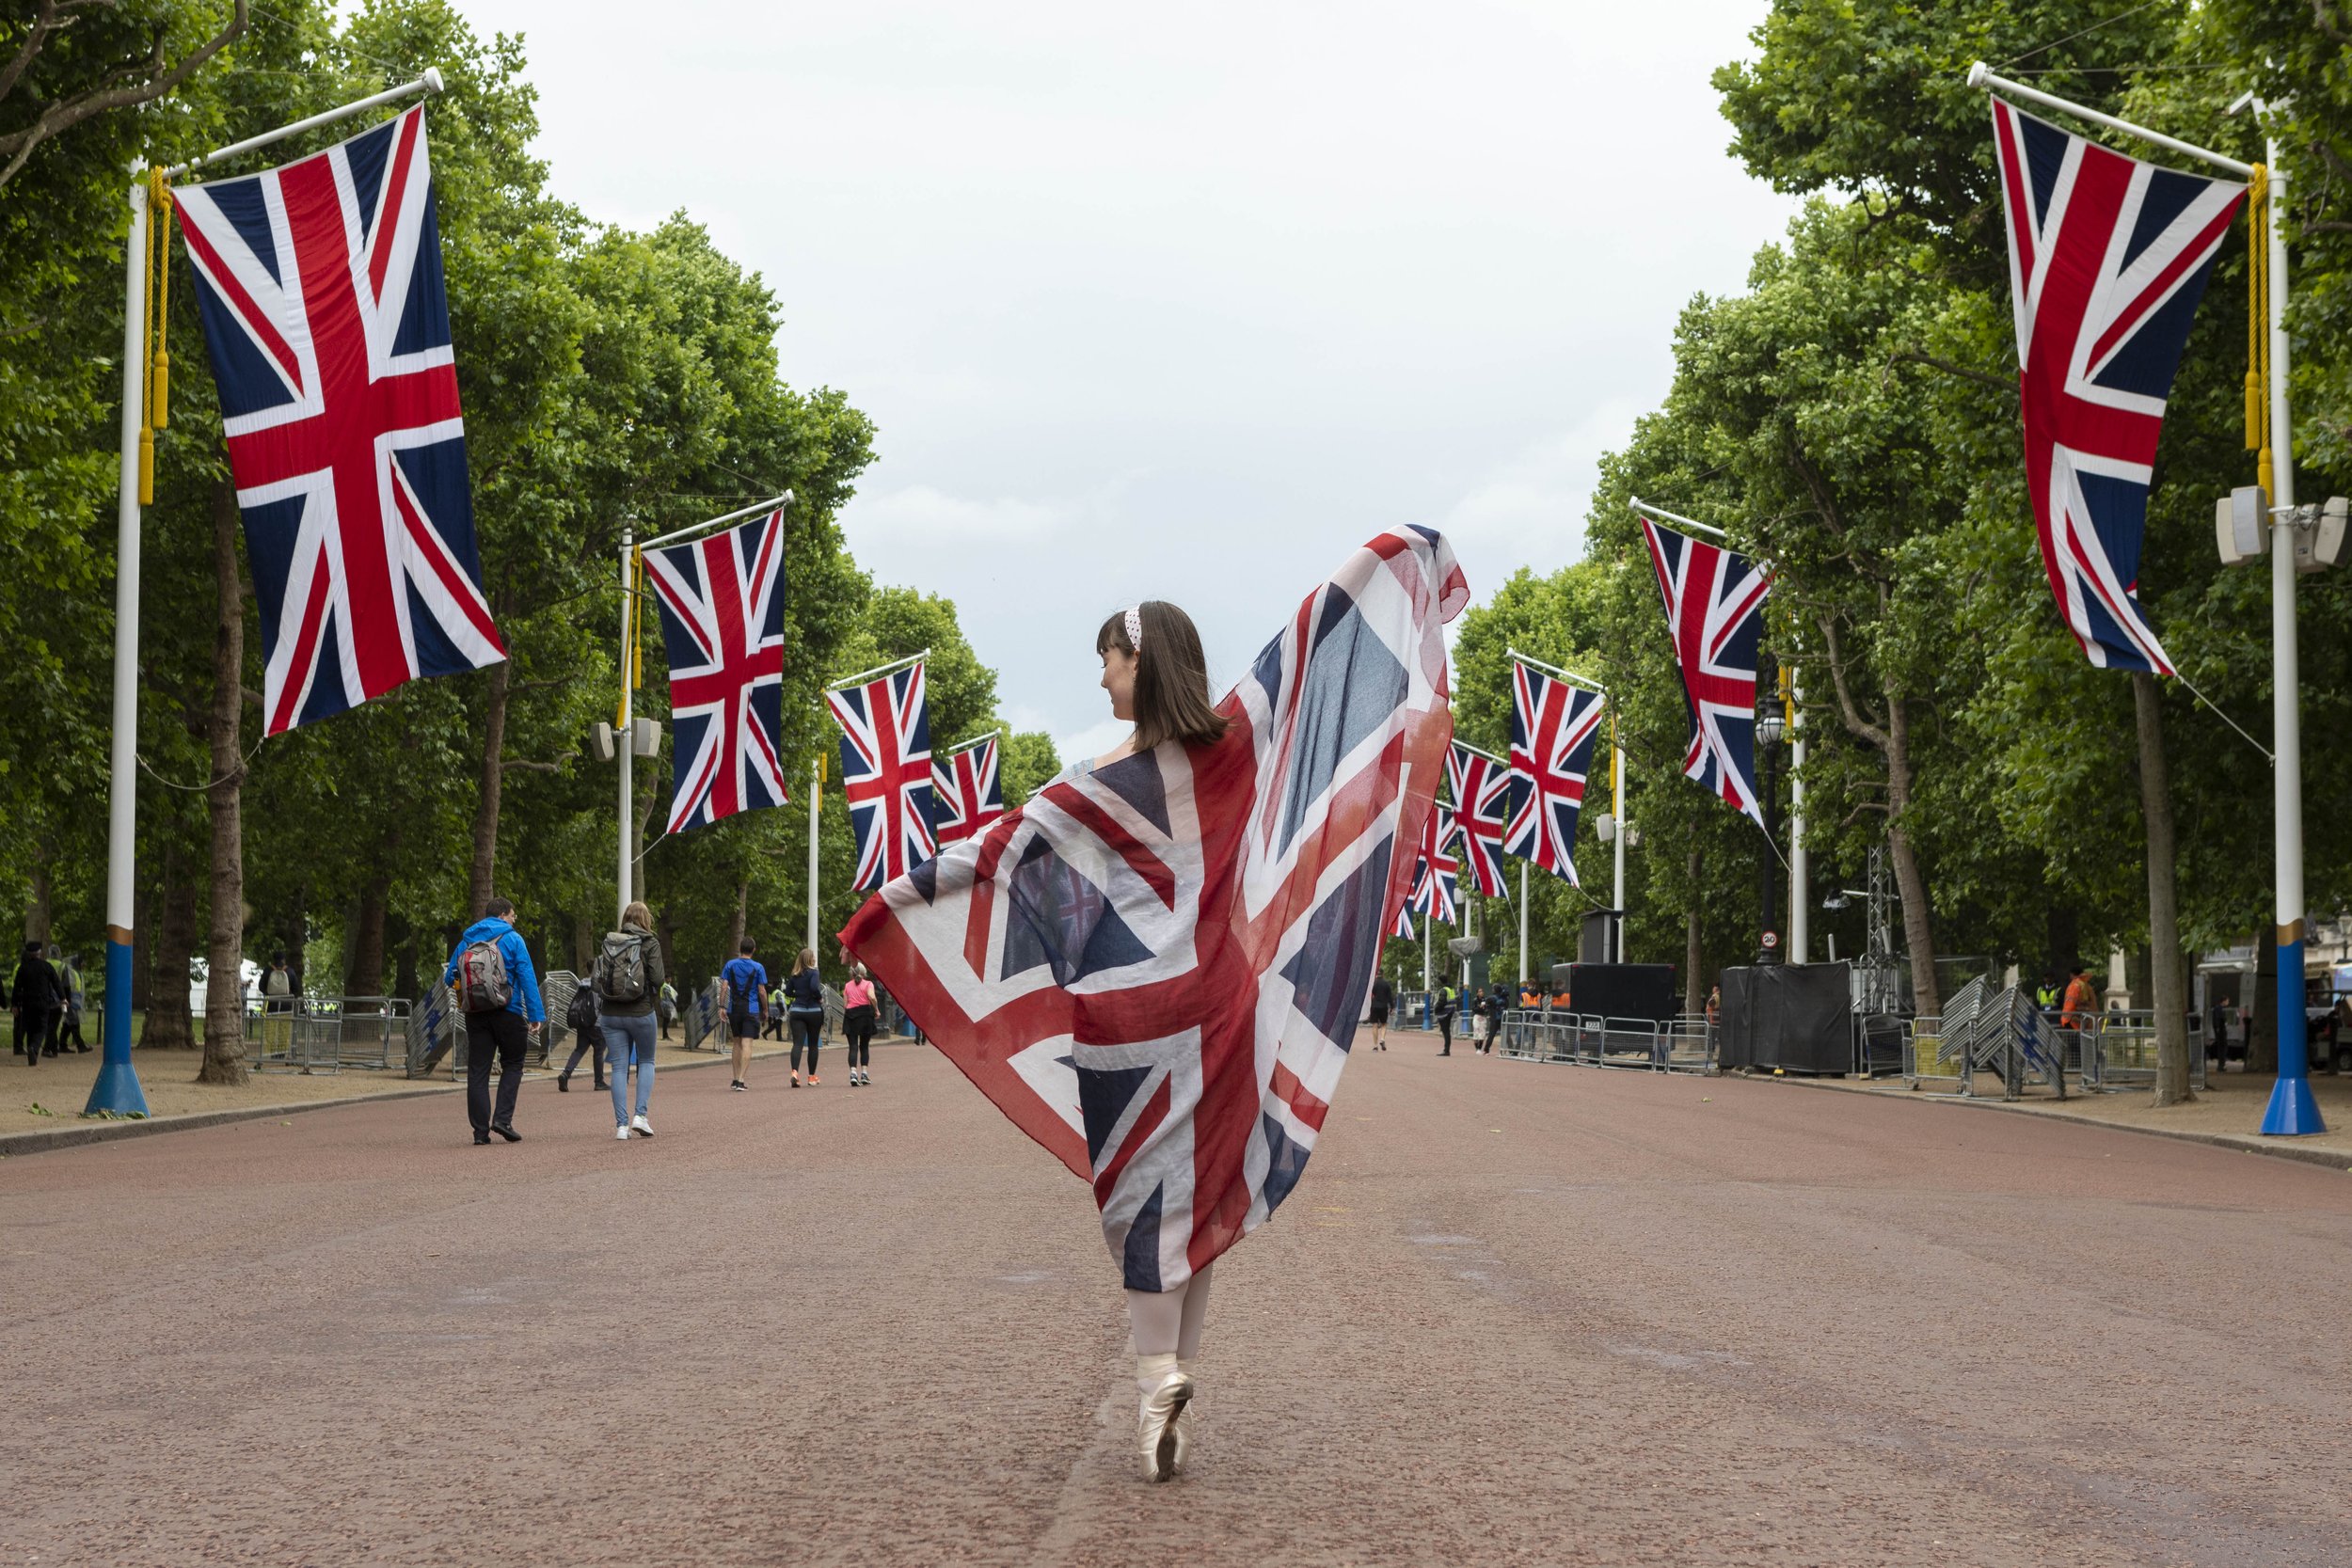  A ballerina wraps herself in a Union flag on The Mall on the third day of the Queen’s Platinum Jubilee weekend celebrations - Jun 2022. 